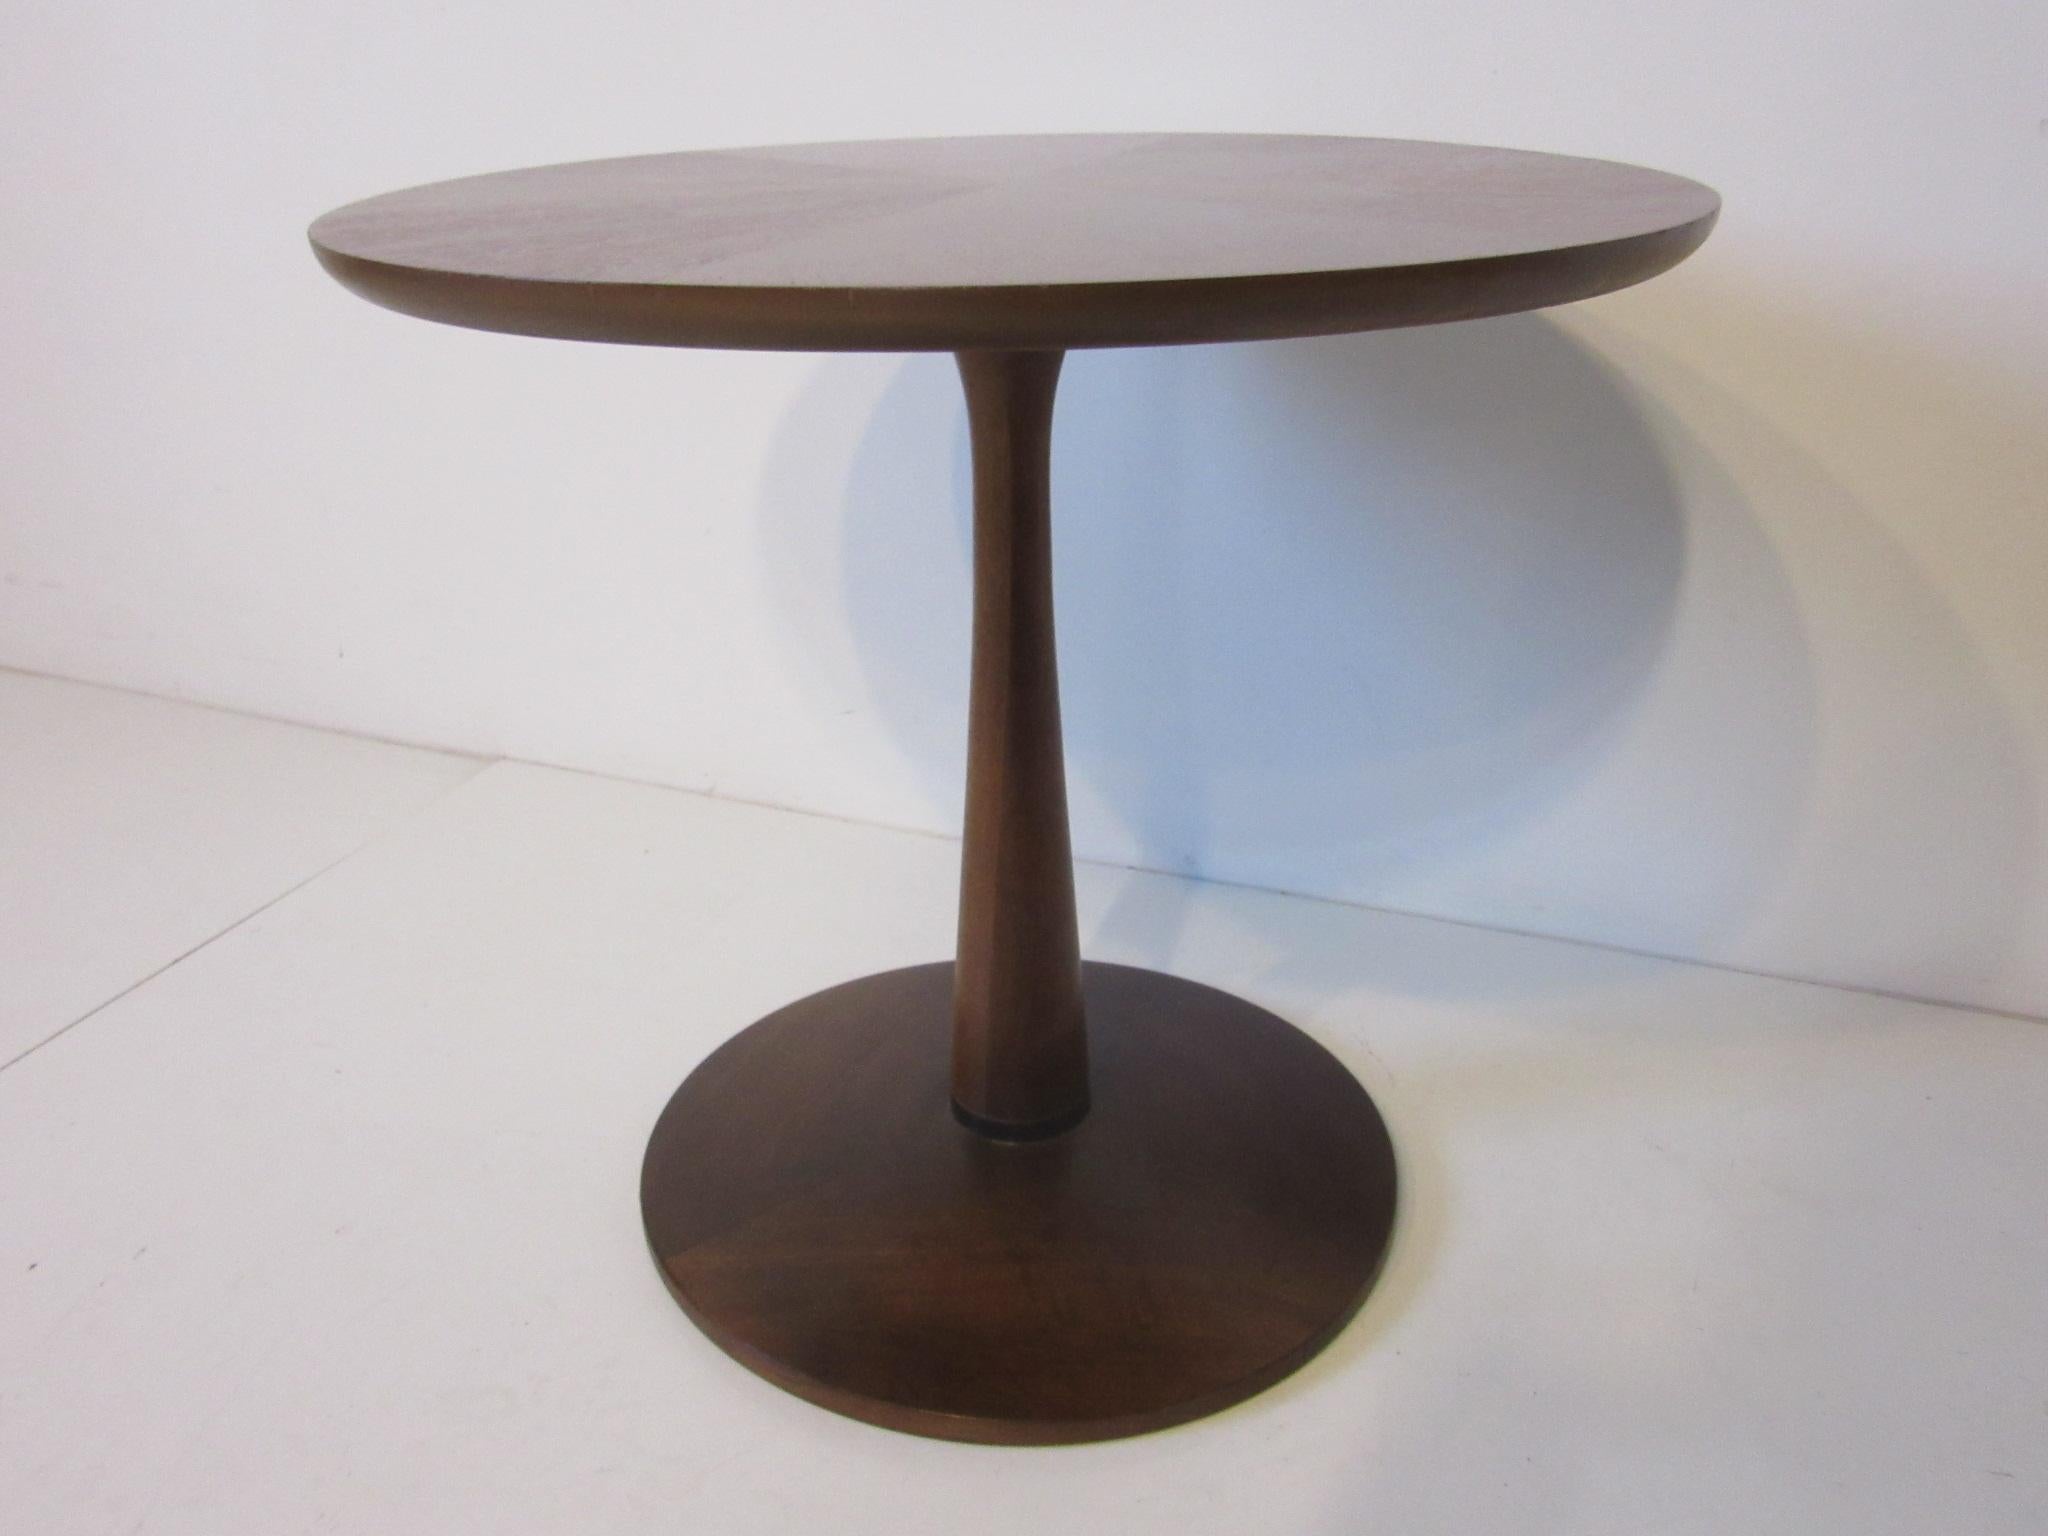 20th Century Walnut Pedestal Based Side Table by Drexel for the Declaration Collection